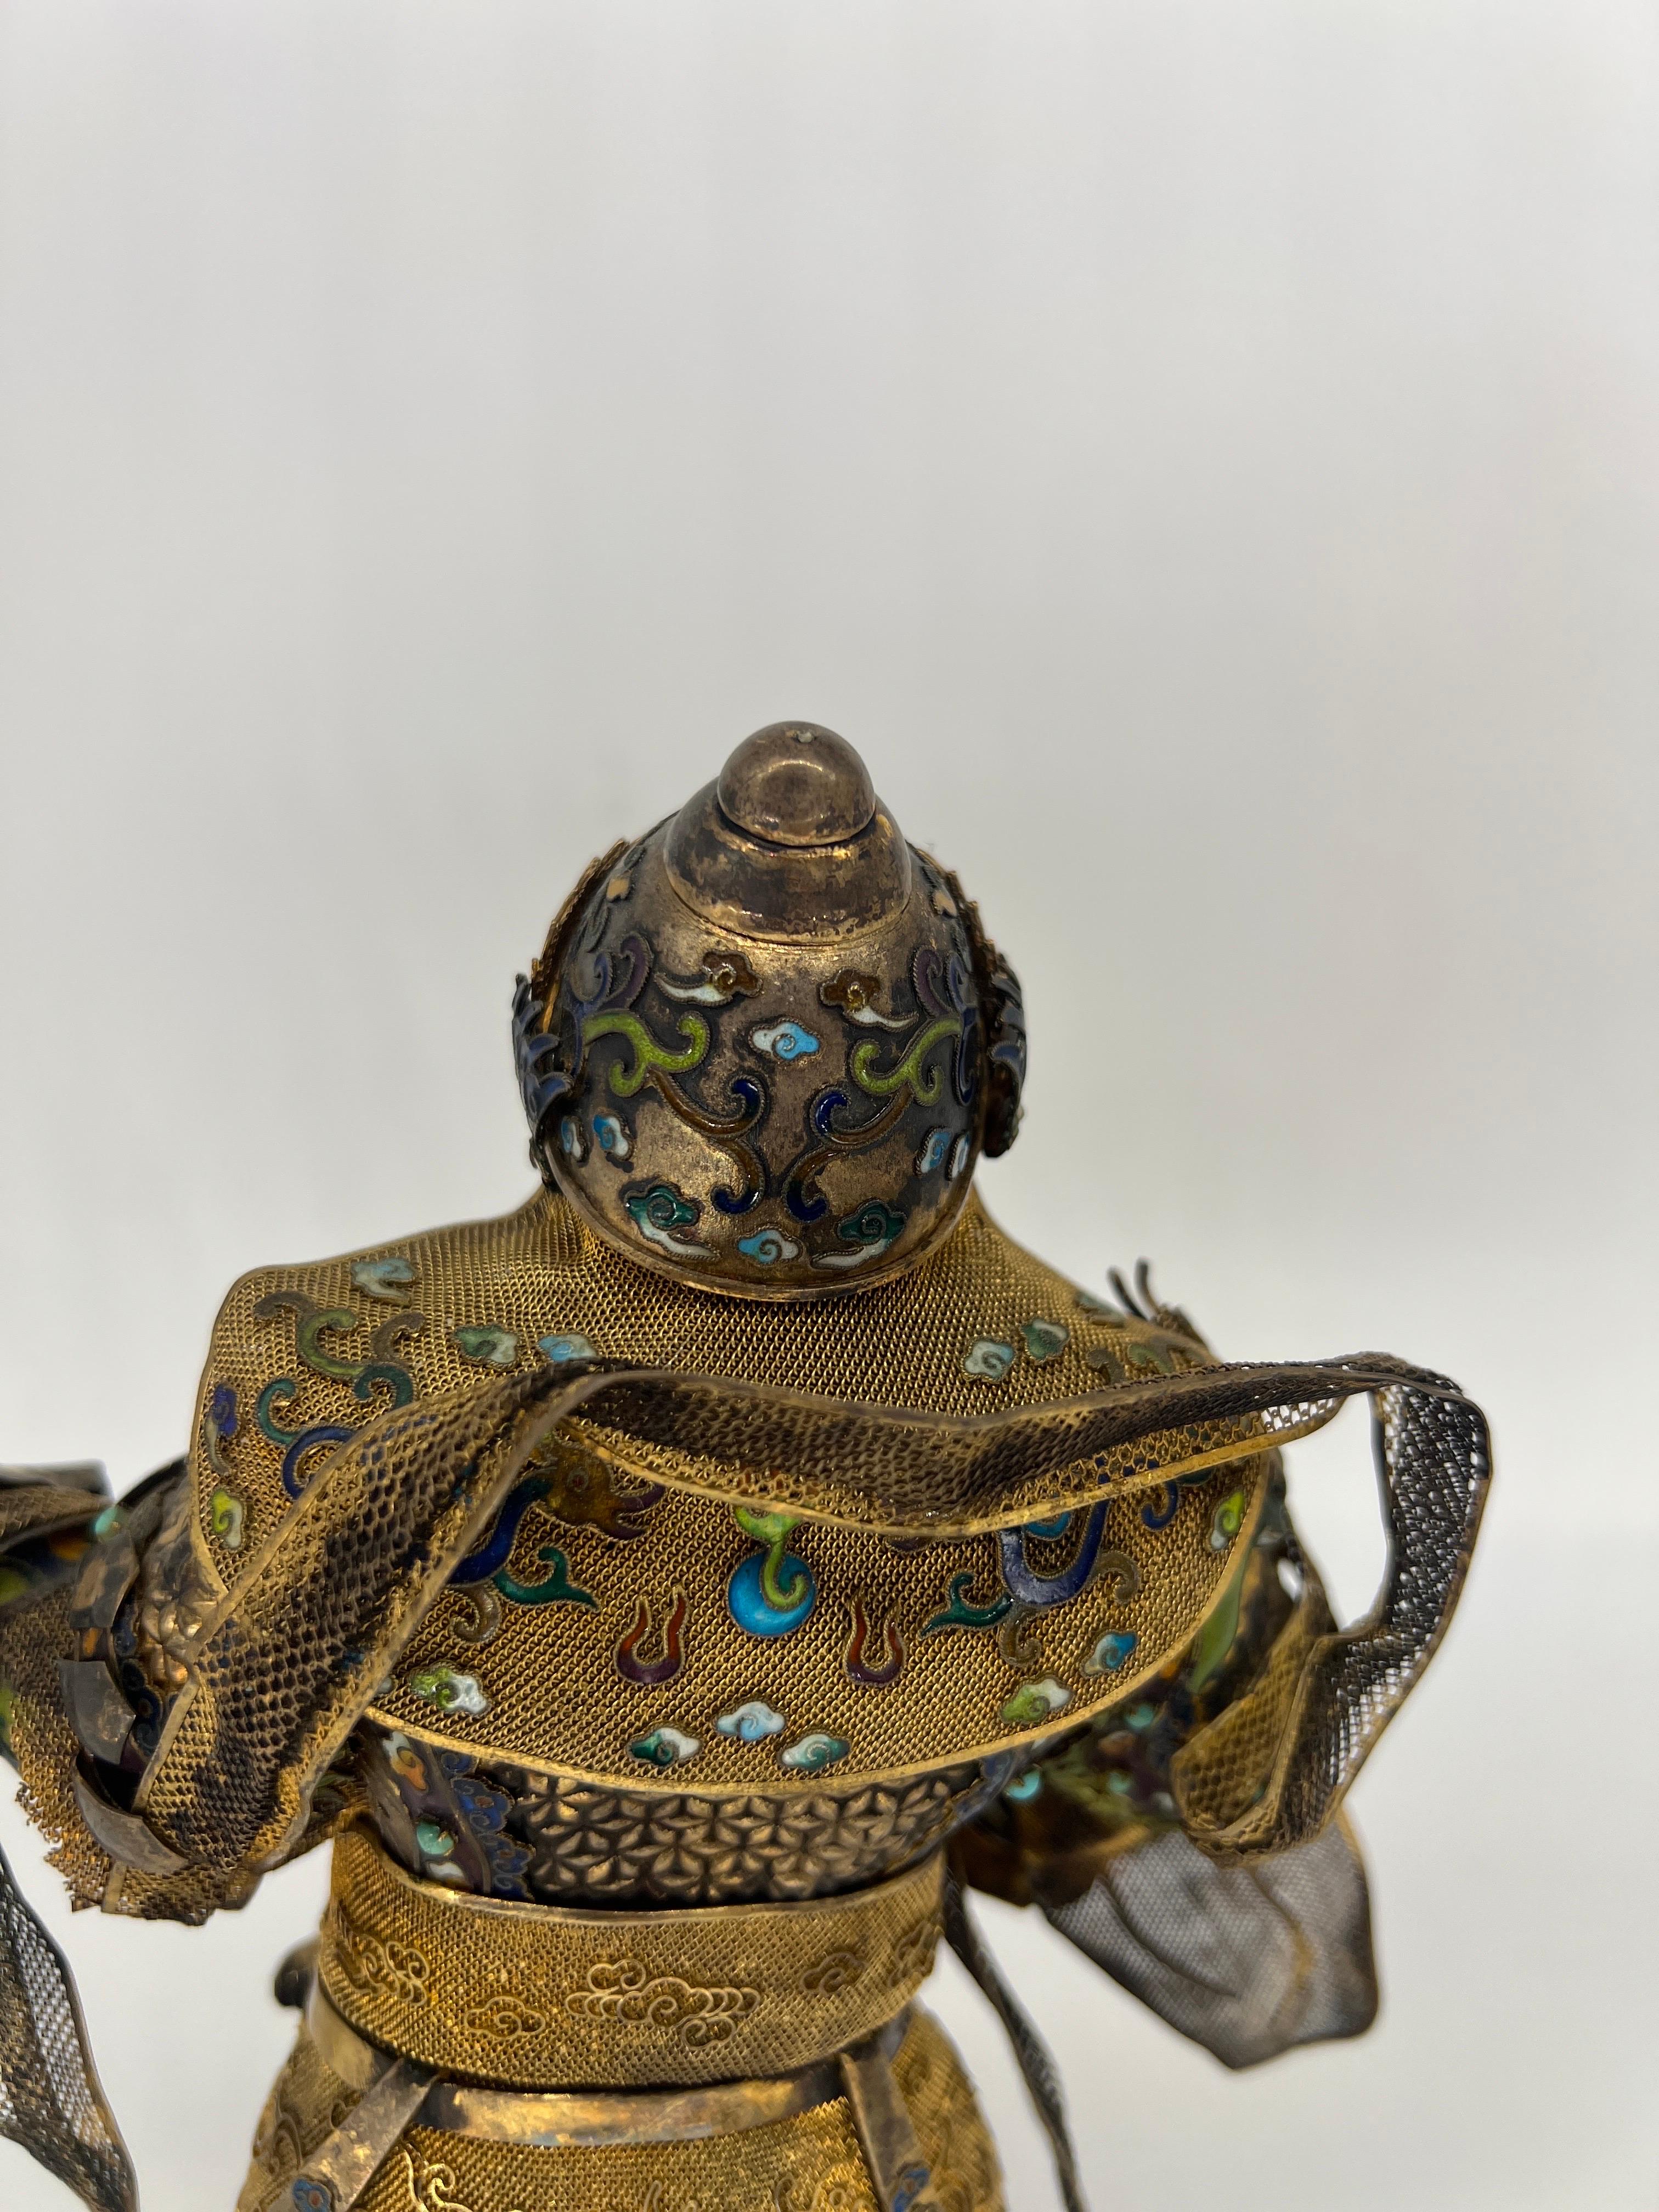 Antique Chinese Silver Gilt, Enamel & Turquoise Mounted Immortal Figurine For Sale 4